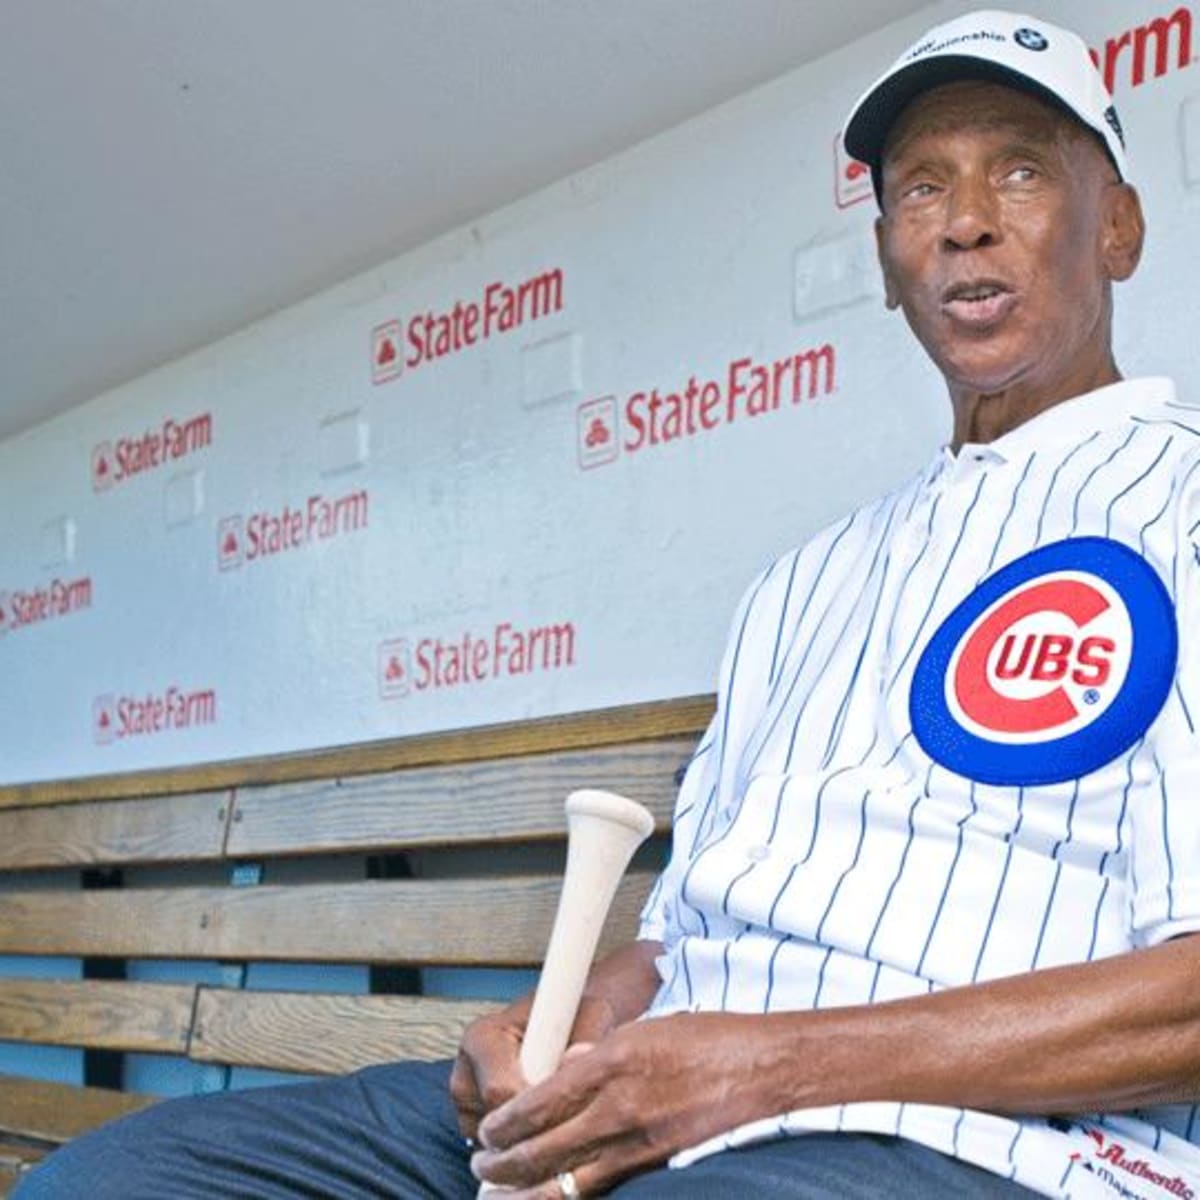 Ernie Banks, 'Mr. Cub,' dies at age 83 from heart attack - ABC7 Chicago